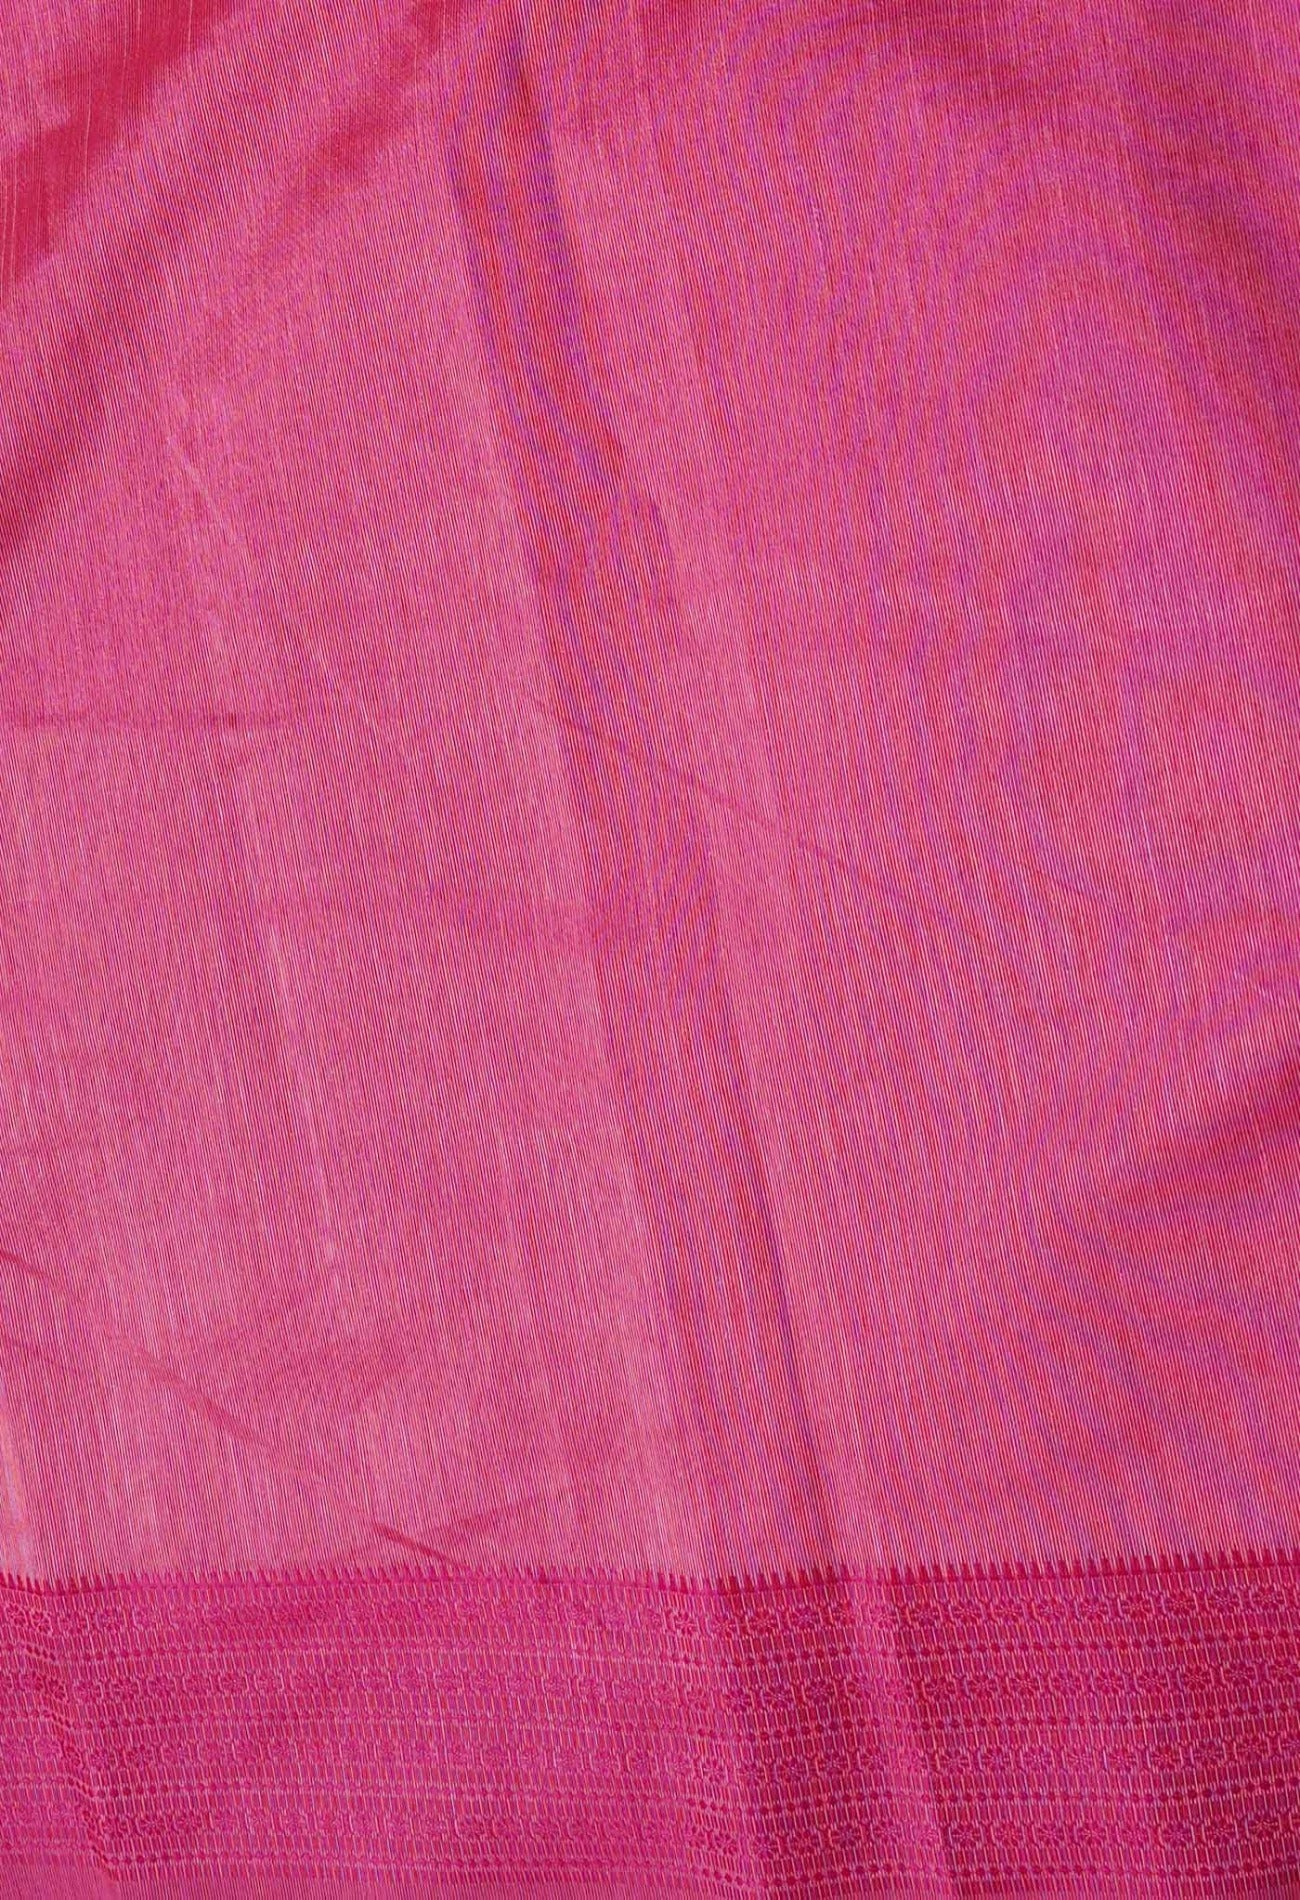 Online Shopping for Pink  Mysore Sico Saree with Fancy/Ethnic Prints from Karnataka at Unnatisilks.com India
